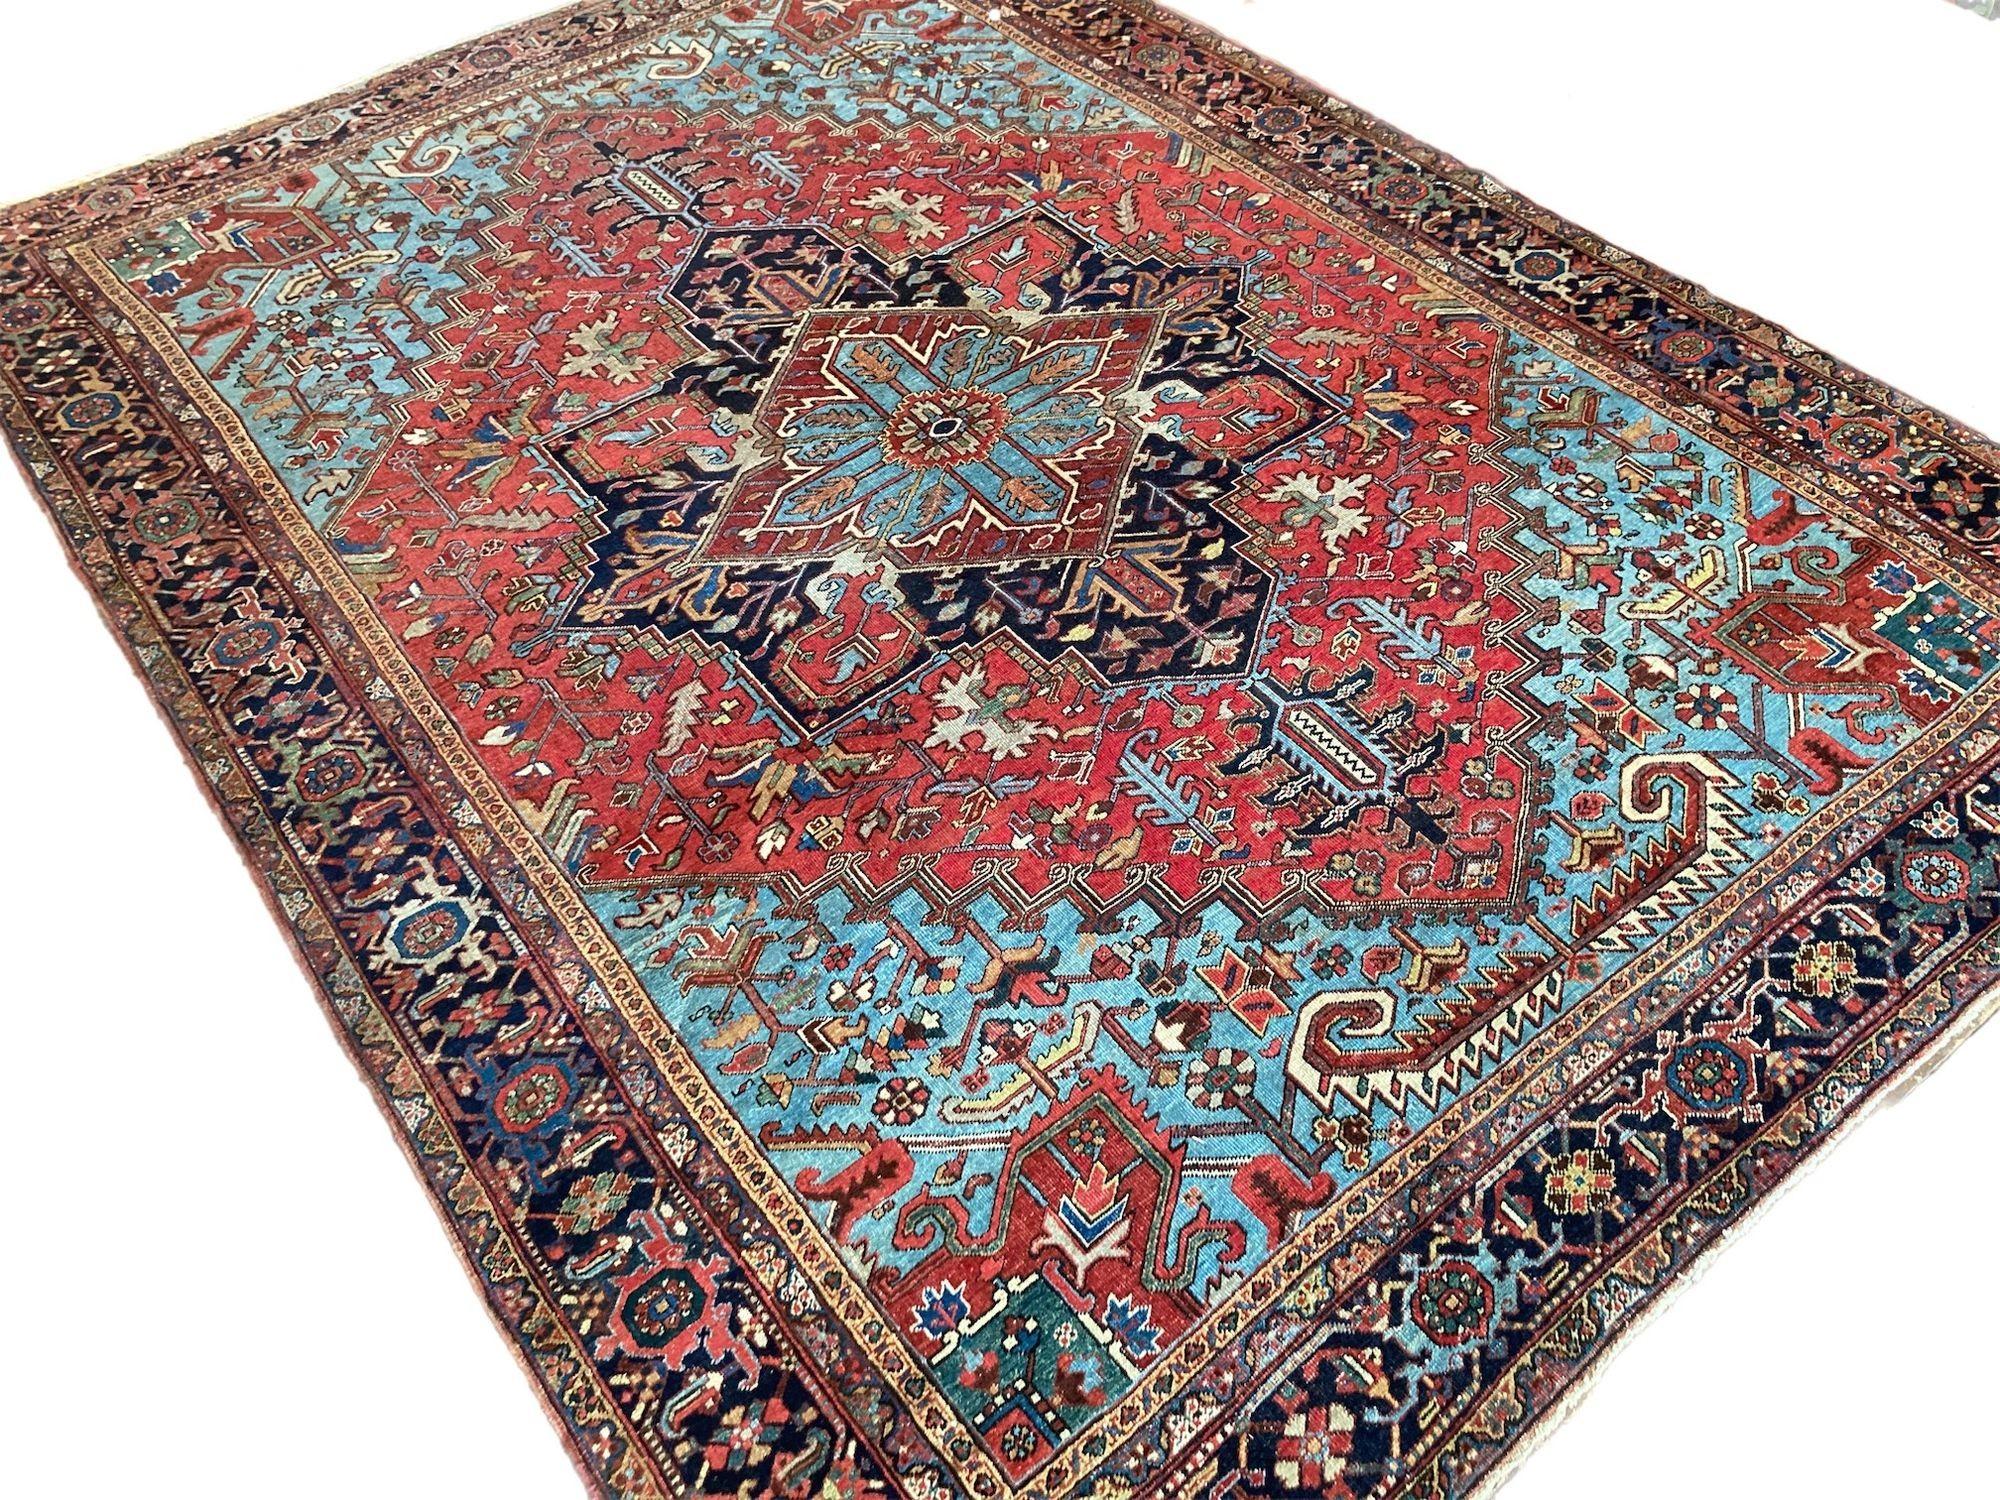 Antique Heriz Carpet 3.96m x 2.93m In Good Condition For Sale In St. Albans, GB